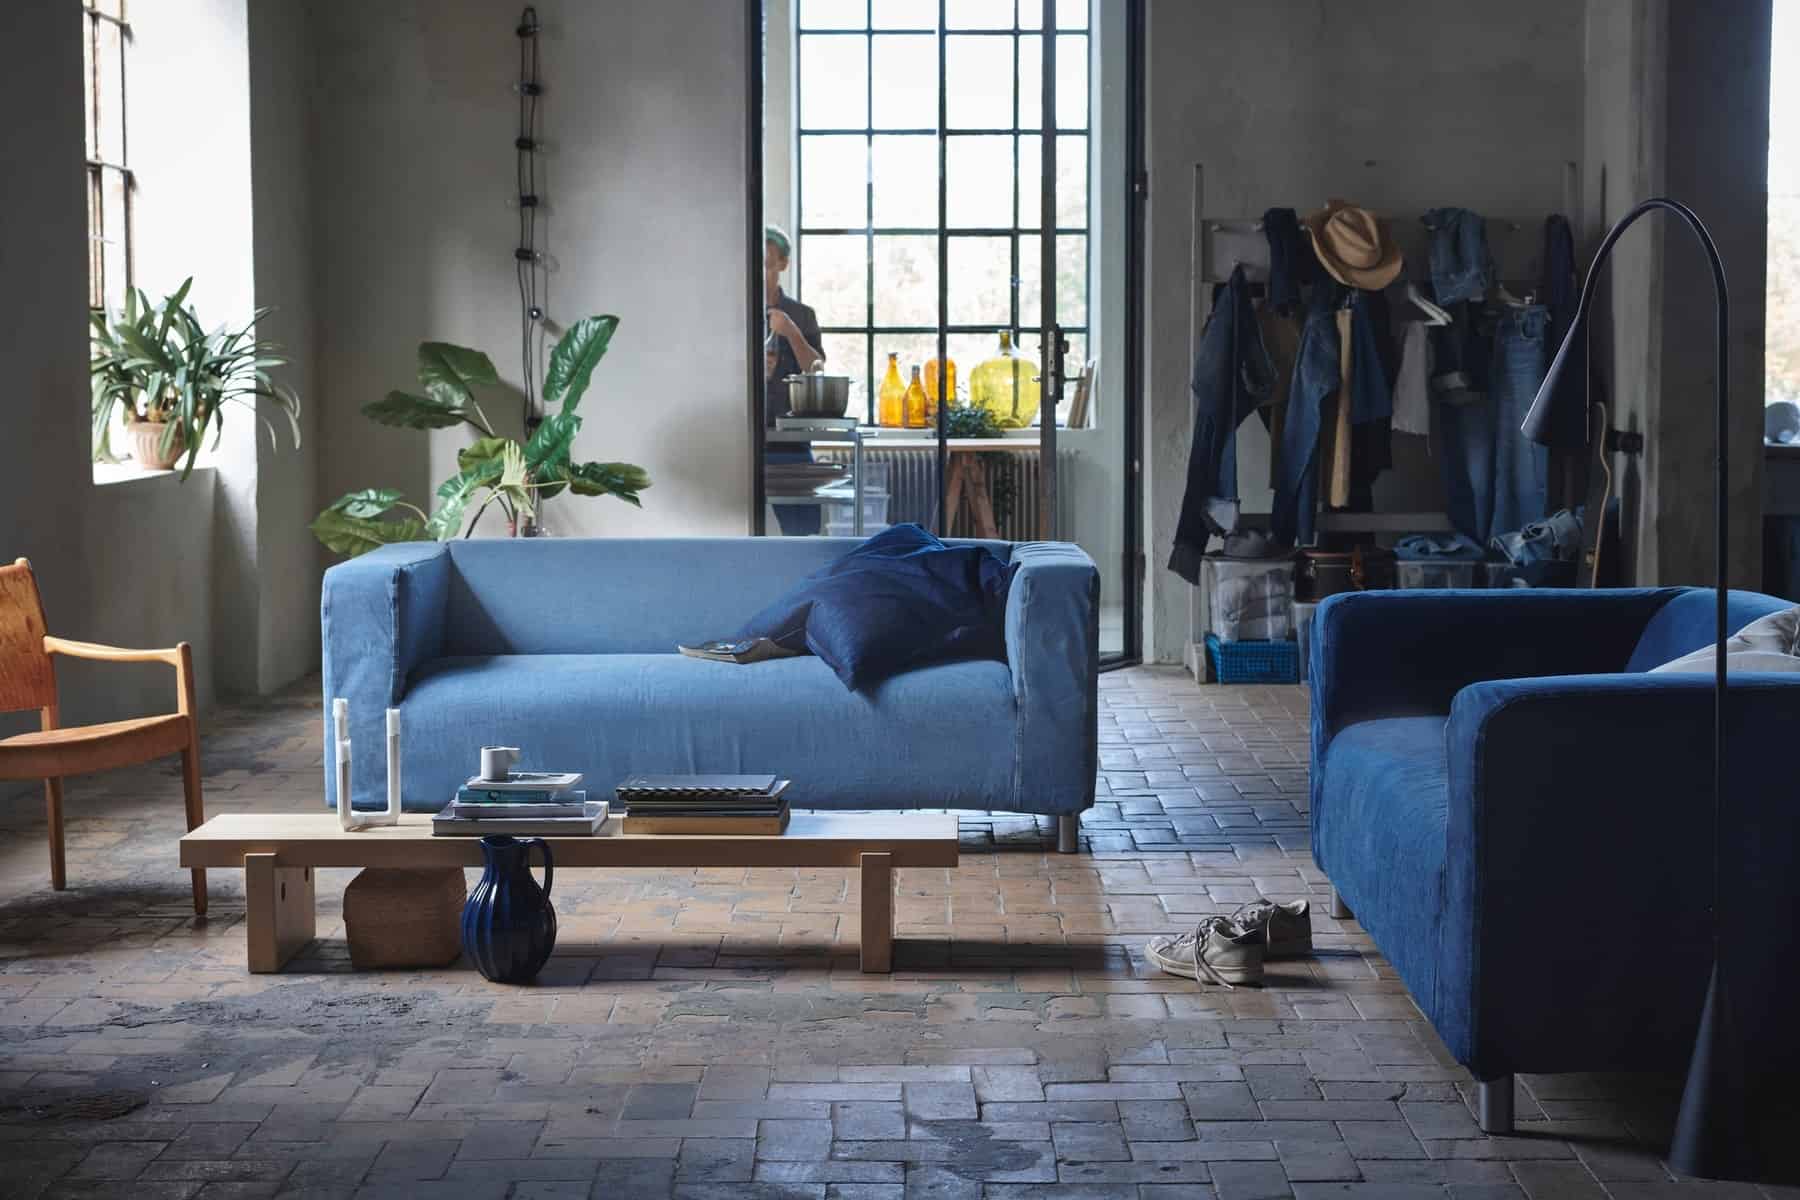 Would you buy a sofa made from old jeans? | FashionBite